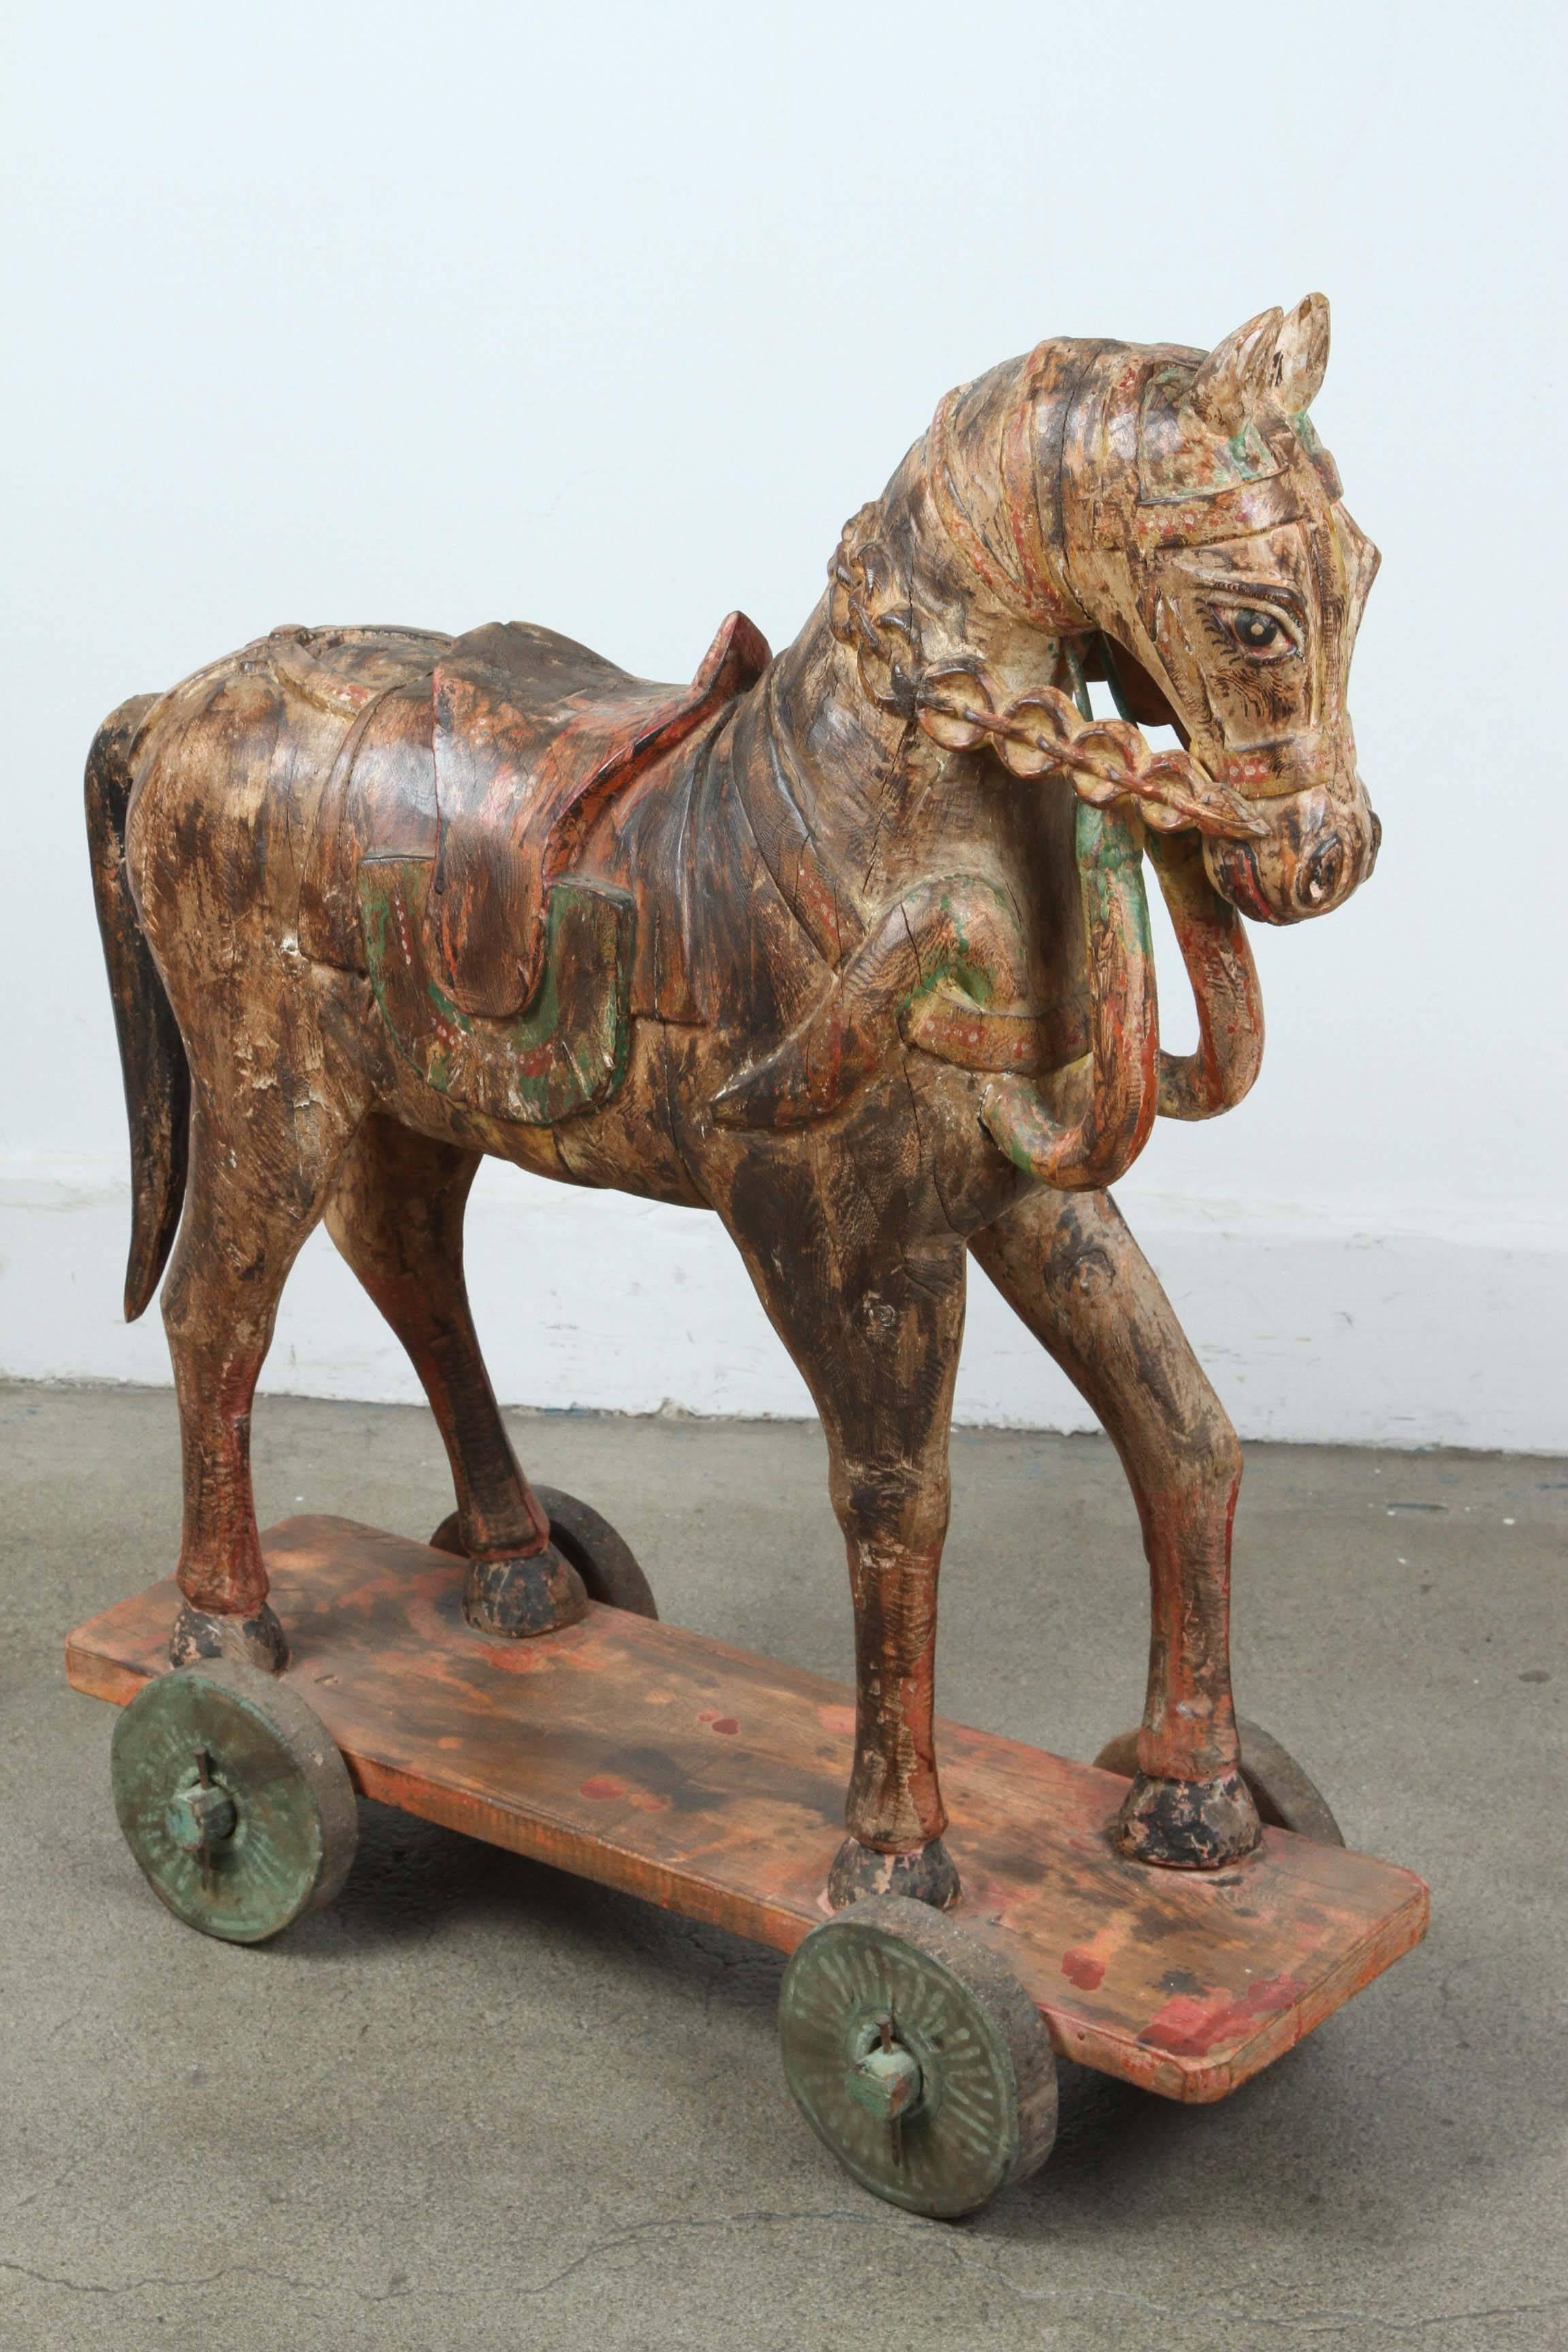 Pair of 19th century hand-carved oversized wooden Indian temple horses with poly-chrome decorated sitting a top of a wheeled board. 
Large heavy Antique Southeast Asian Carved Polychrome Wood Horses.
Antique Southeast Asian carved wood model of a